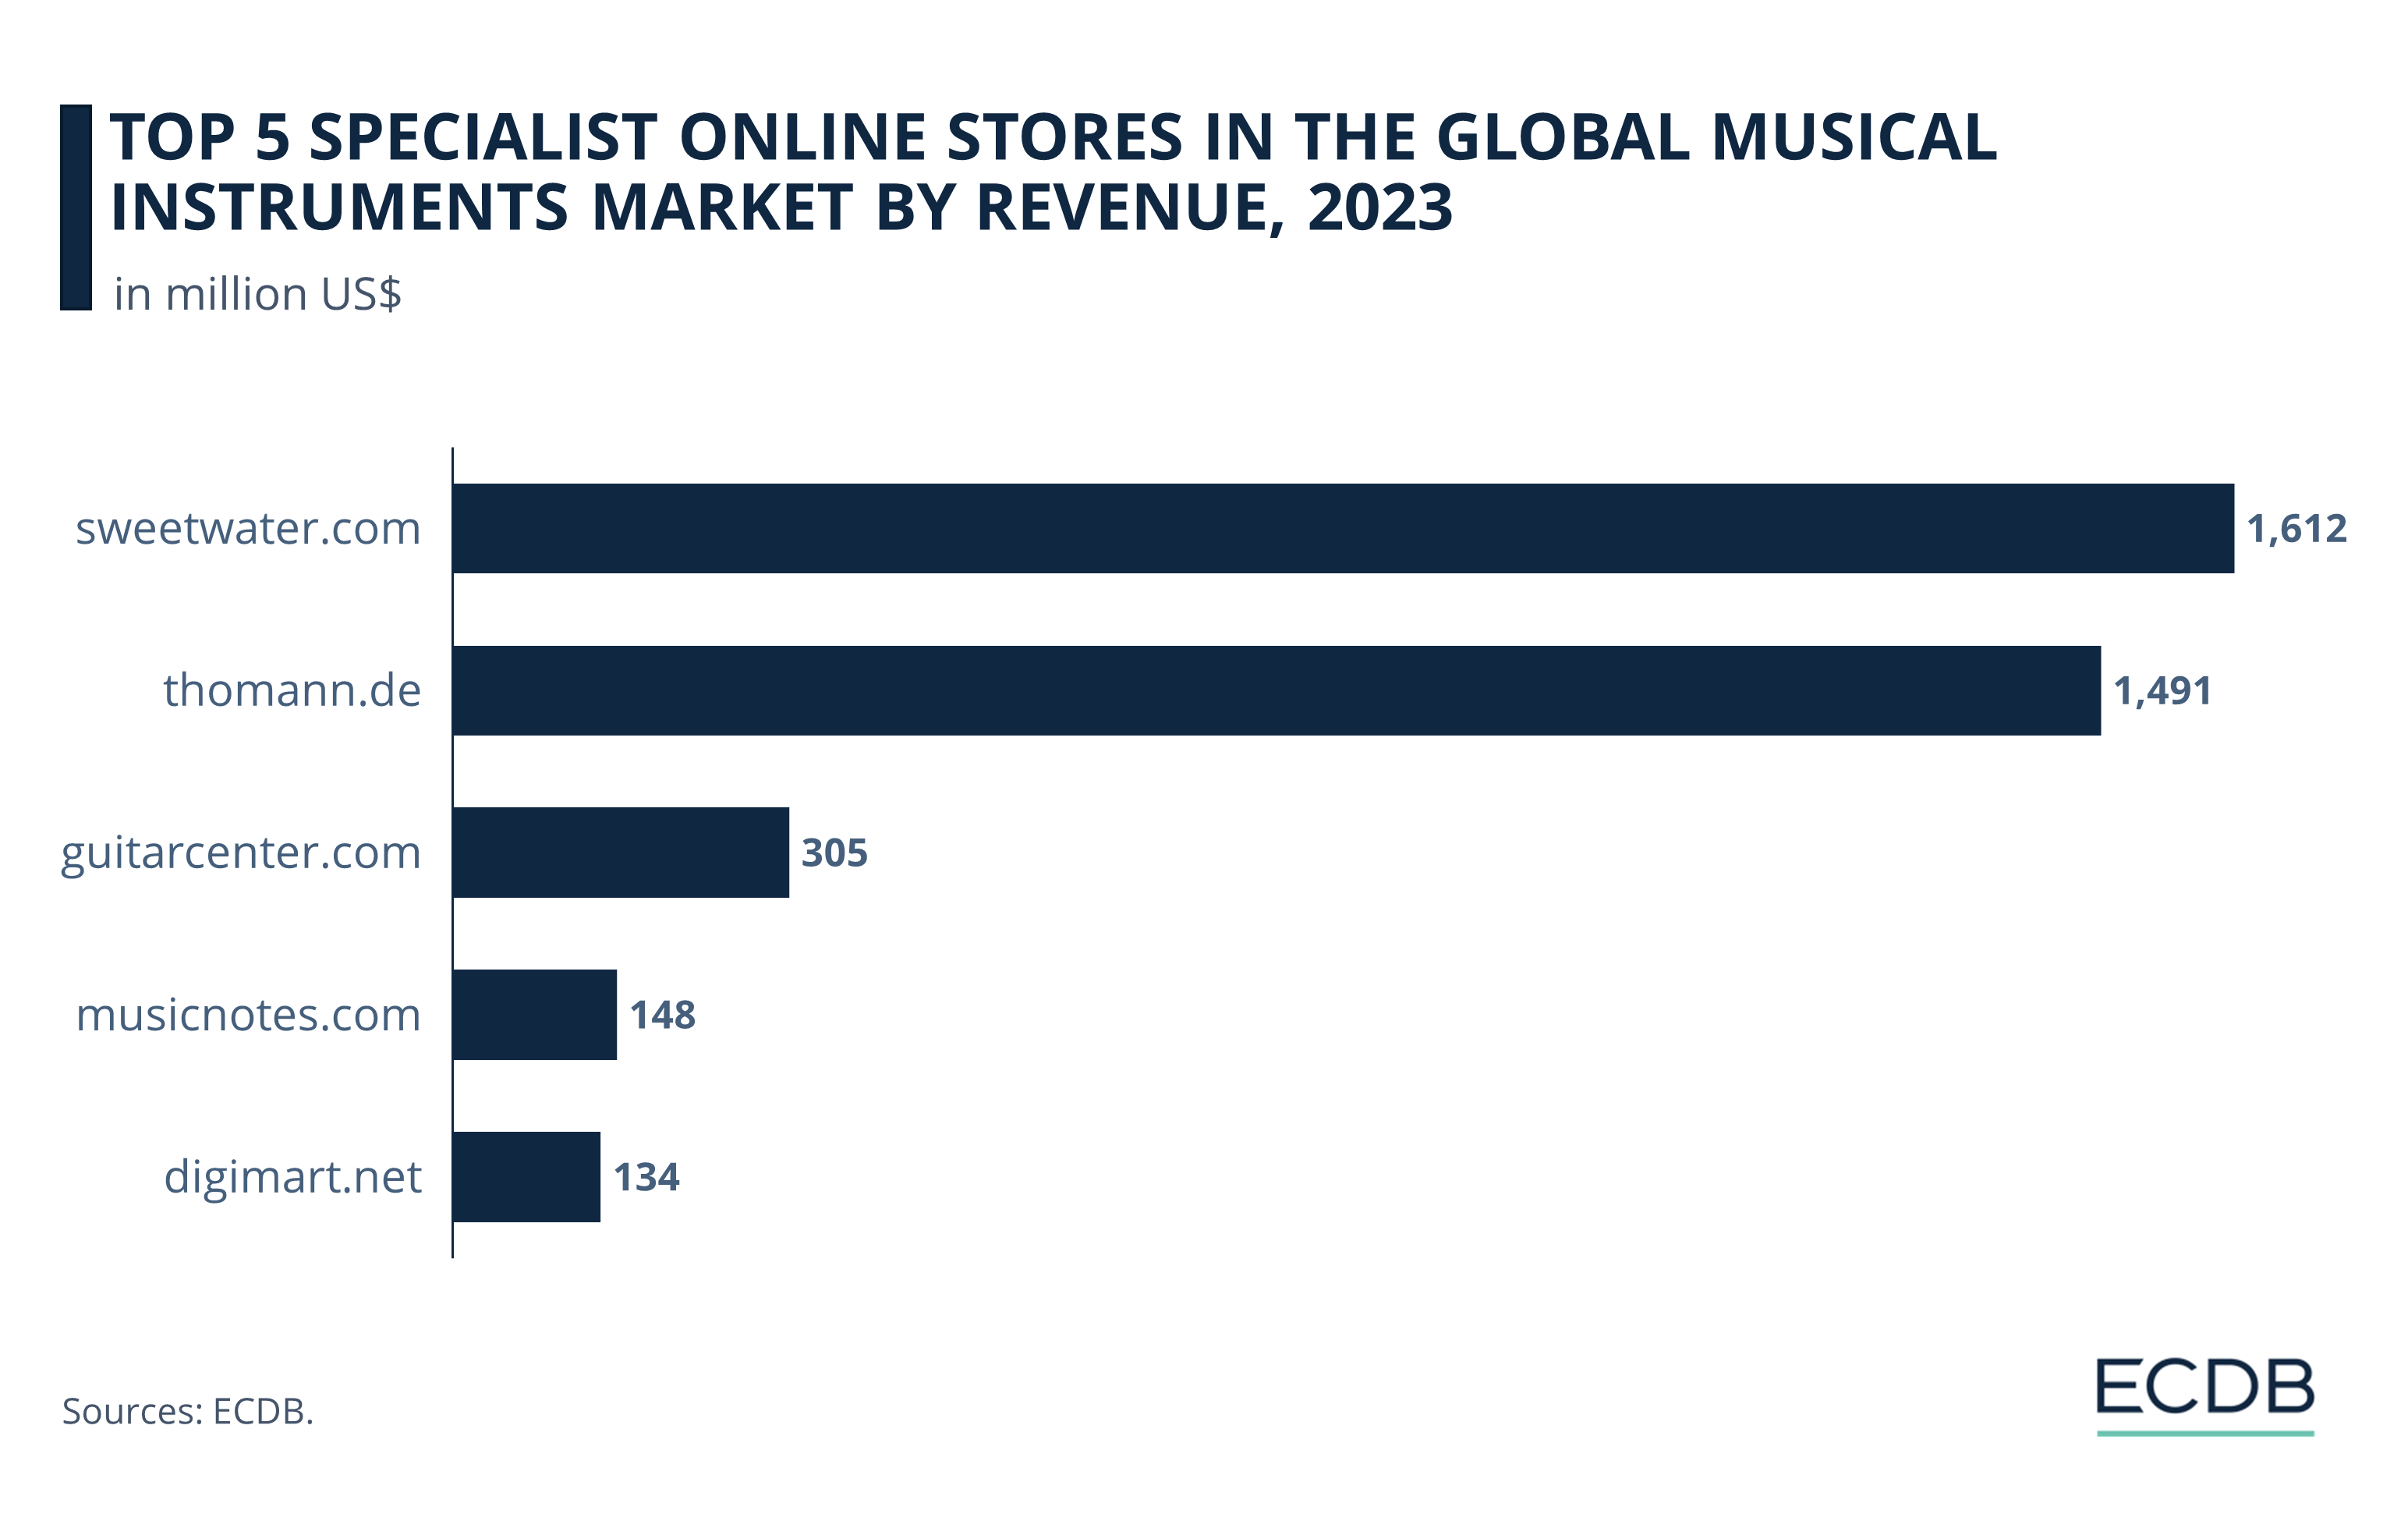 Top 5 Specialist Online Stores in the Global Musical Instruments Market by Revenue, 2023